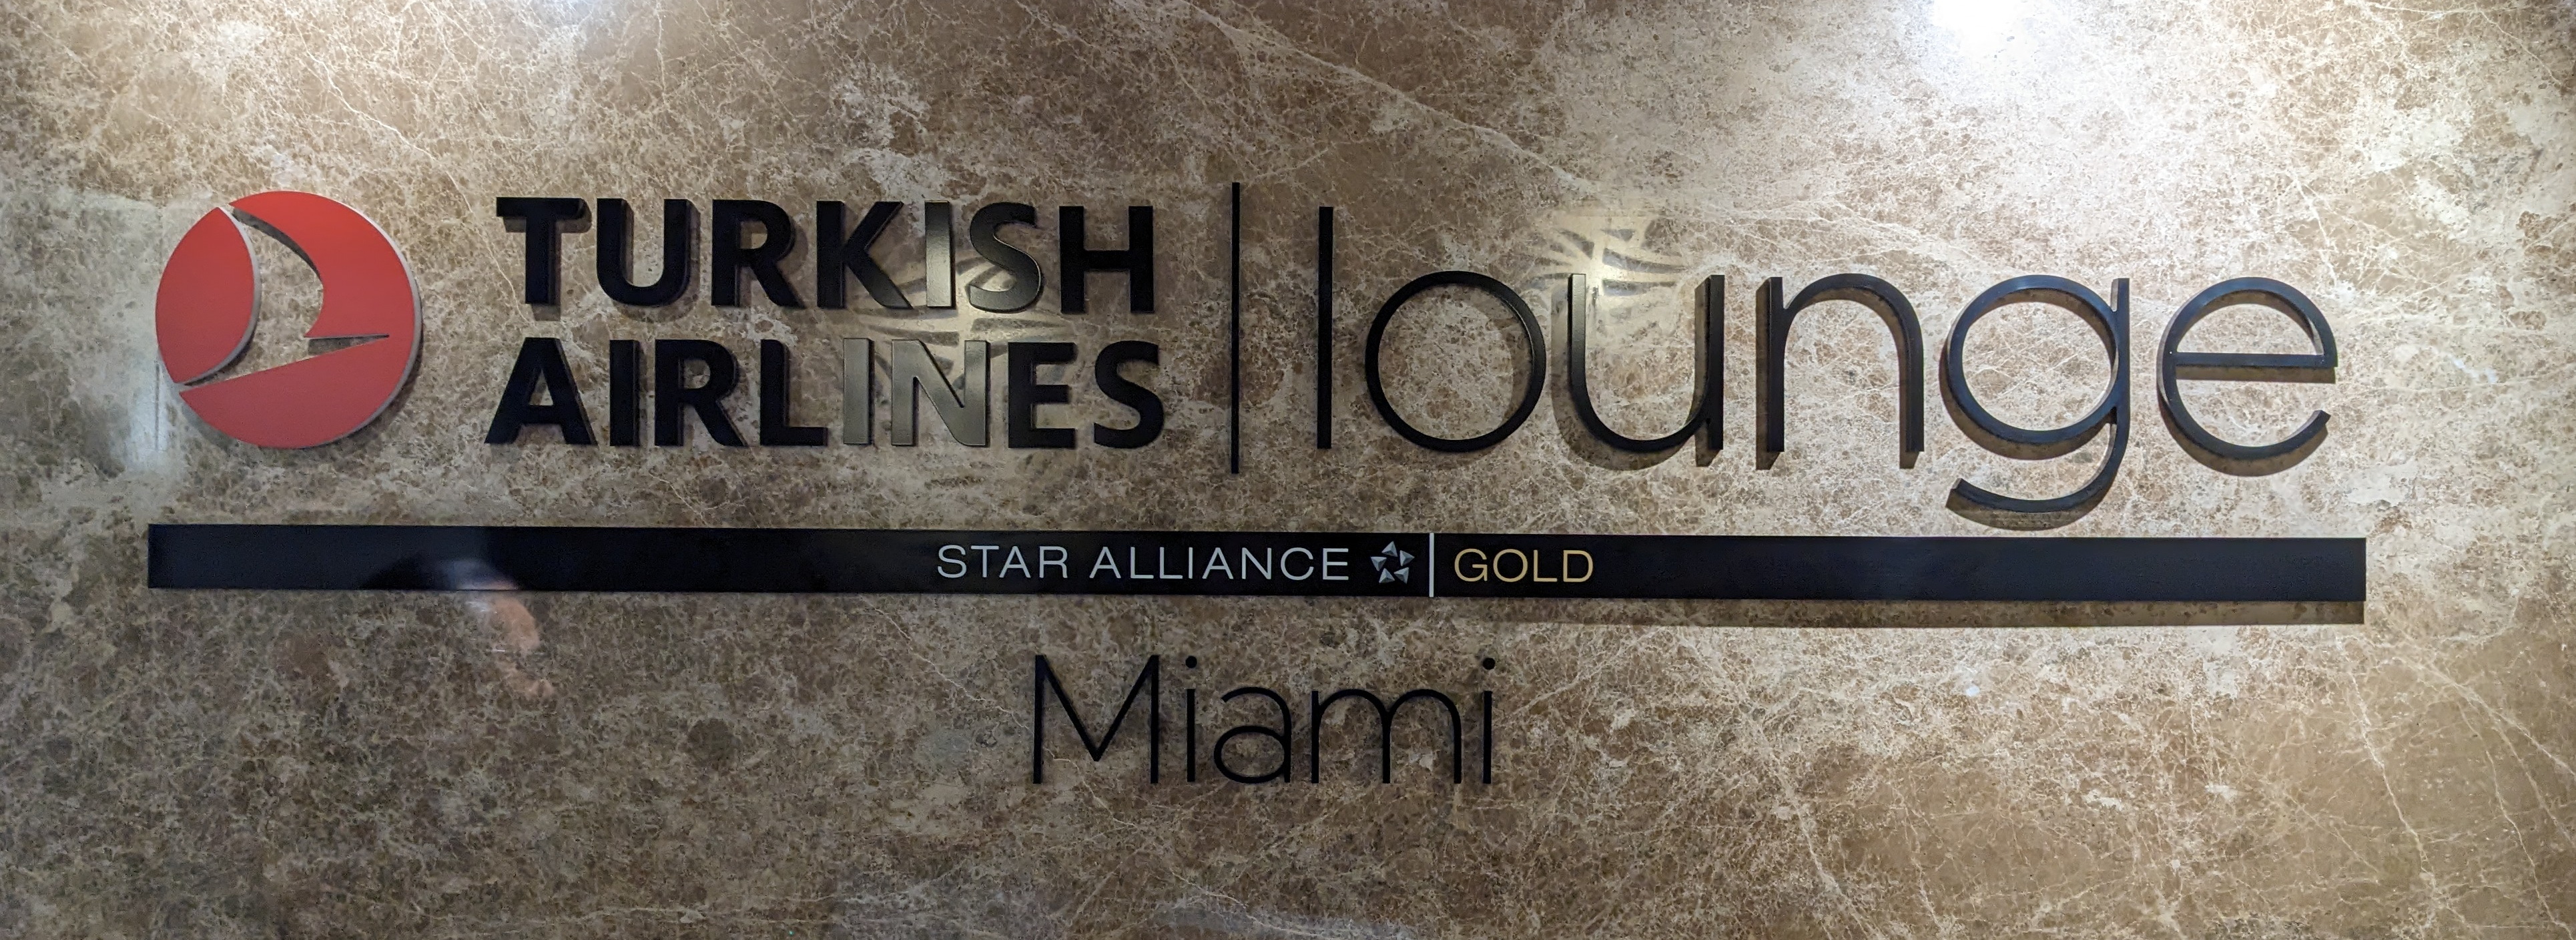 Turkish Airlines Lounge Entrance Sign - Miami E